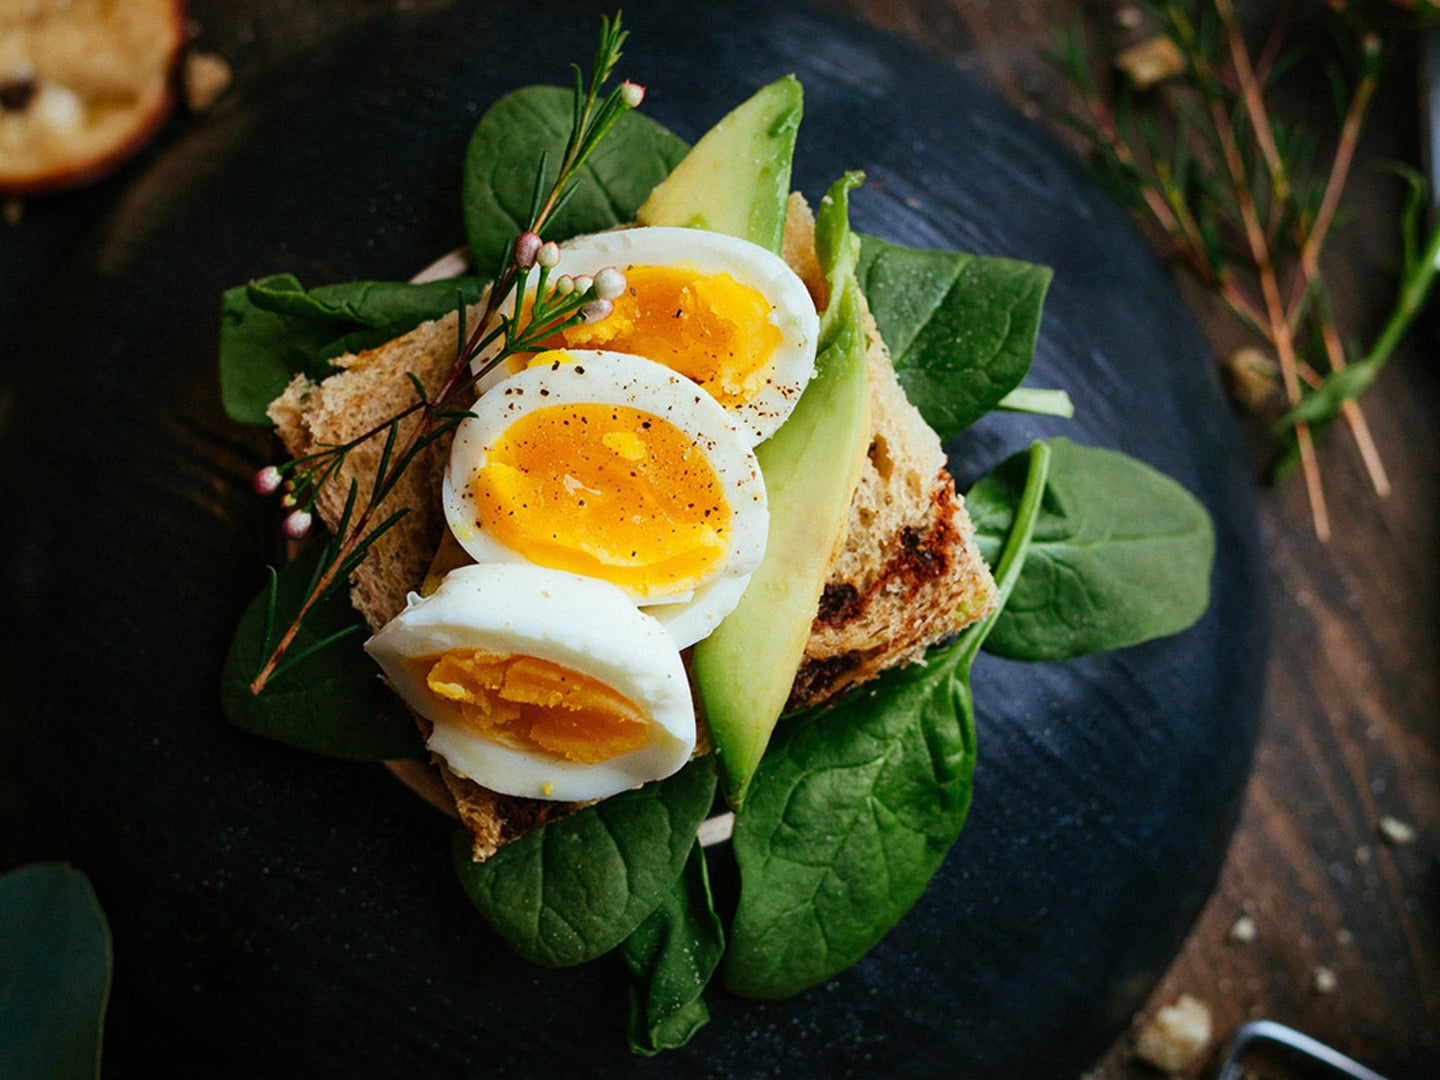 A handful of spinach is topped with a slice of bread, avocado, and medium-boiled eggs on a wooden table.